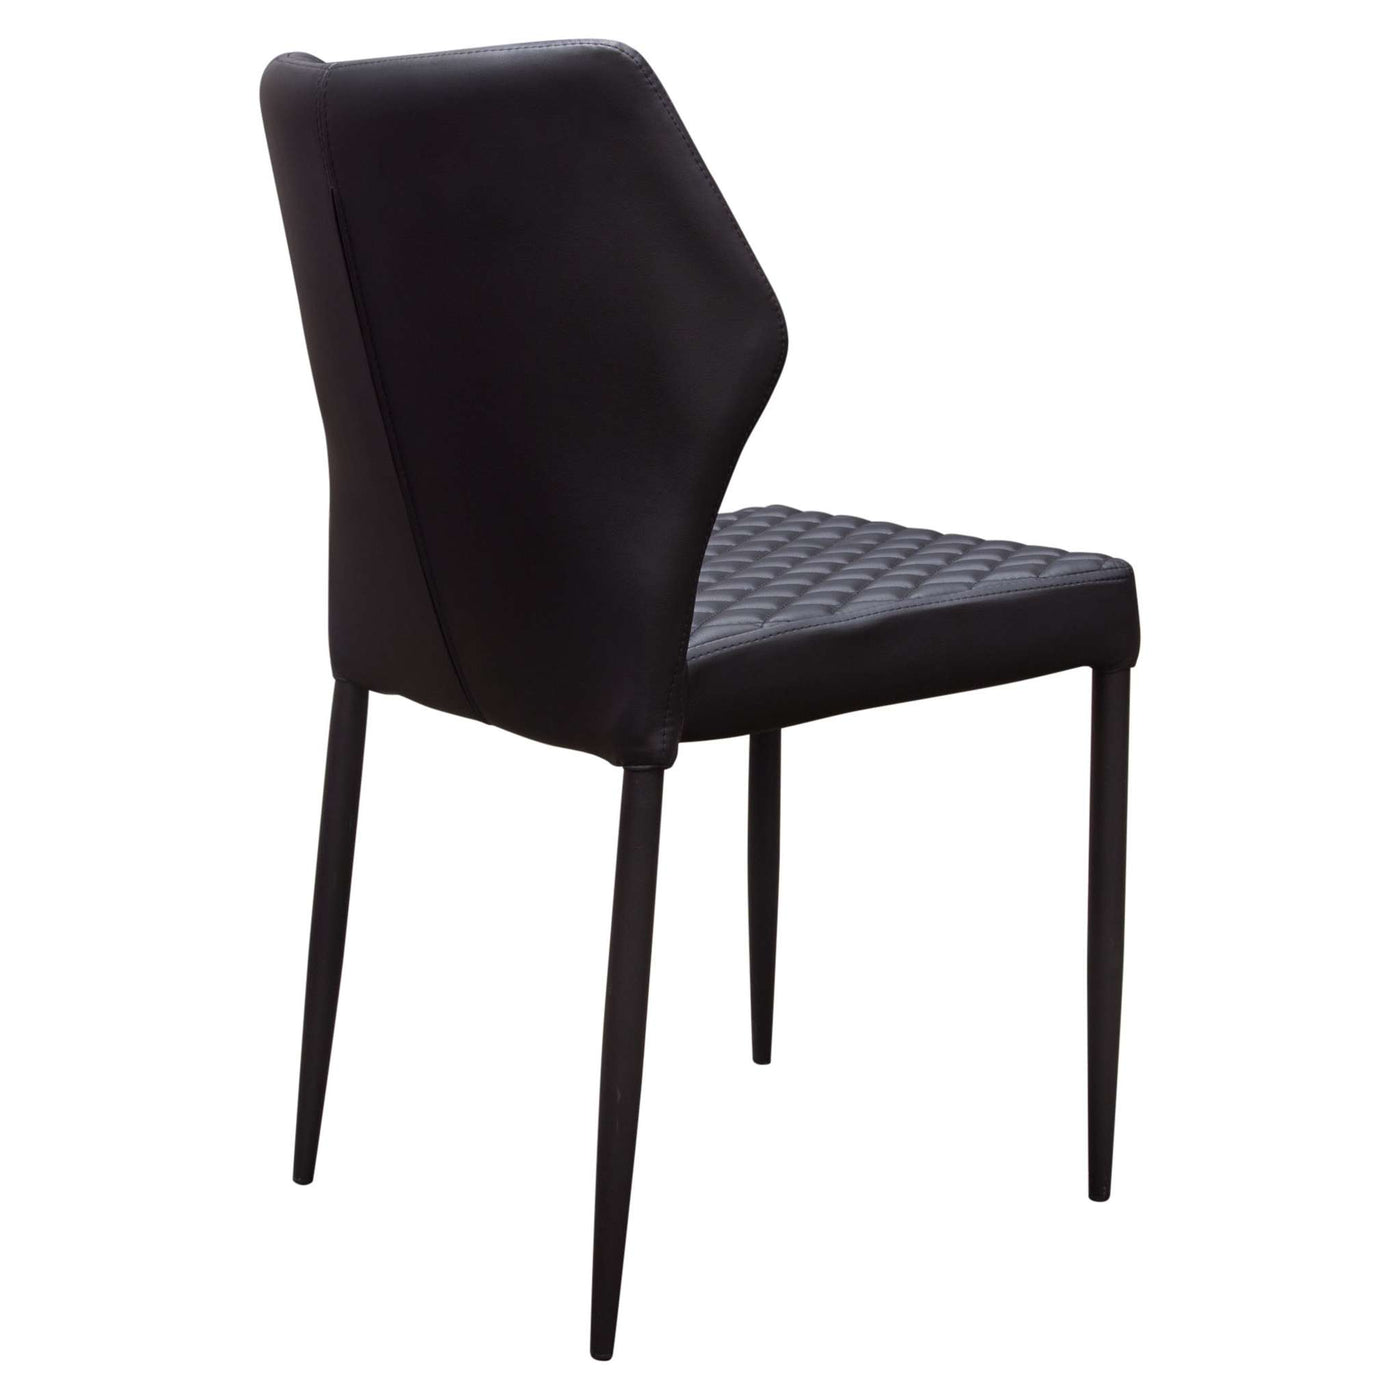 Milo 4-Pack Dining Chairs in Diamond Tufted Leatherette with Black Powder Coat Legs by Diamond Sofa